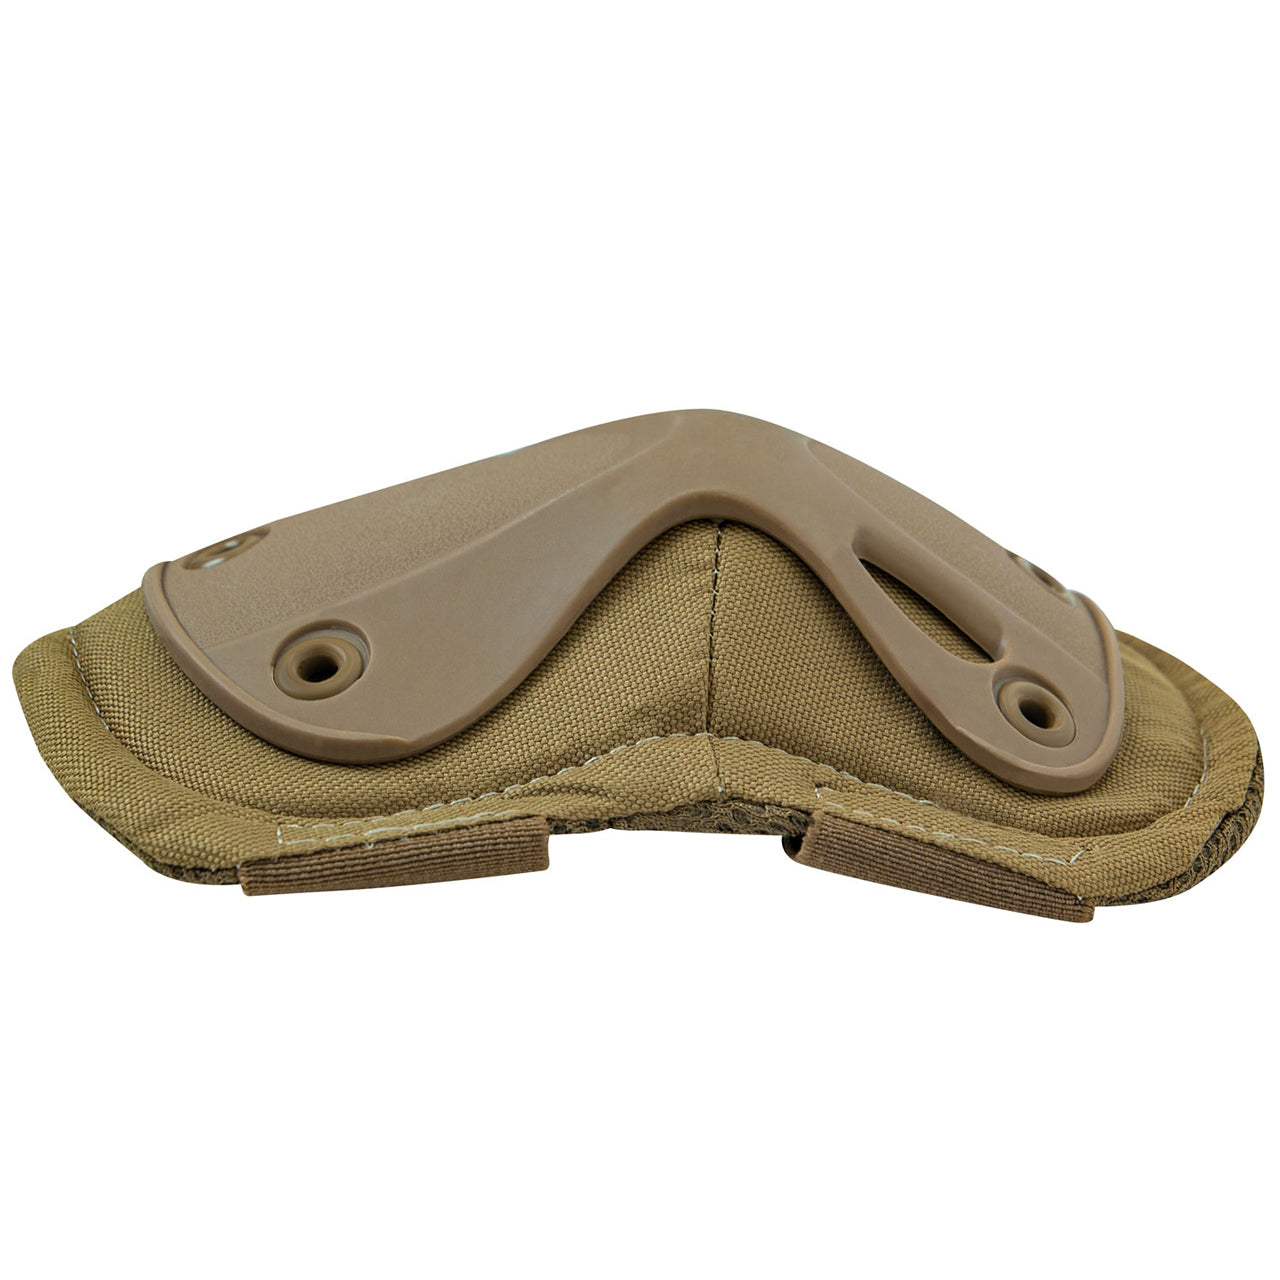 Rothco Low Profile Tactical Elbow Pads Coyote www.defenceqstore.com.au